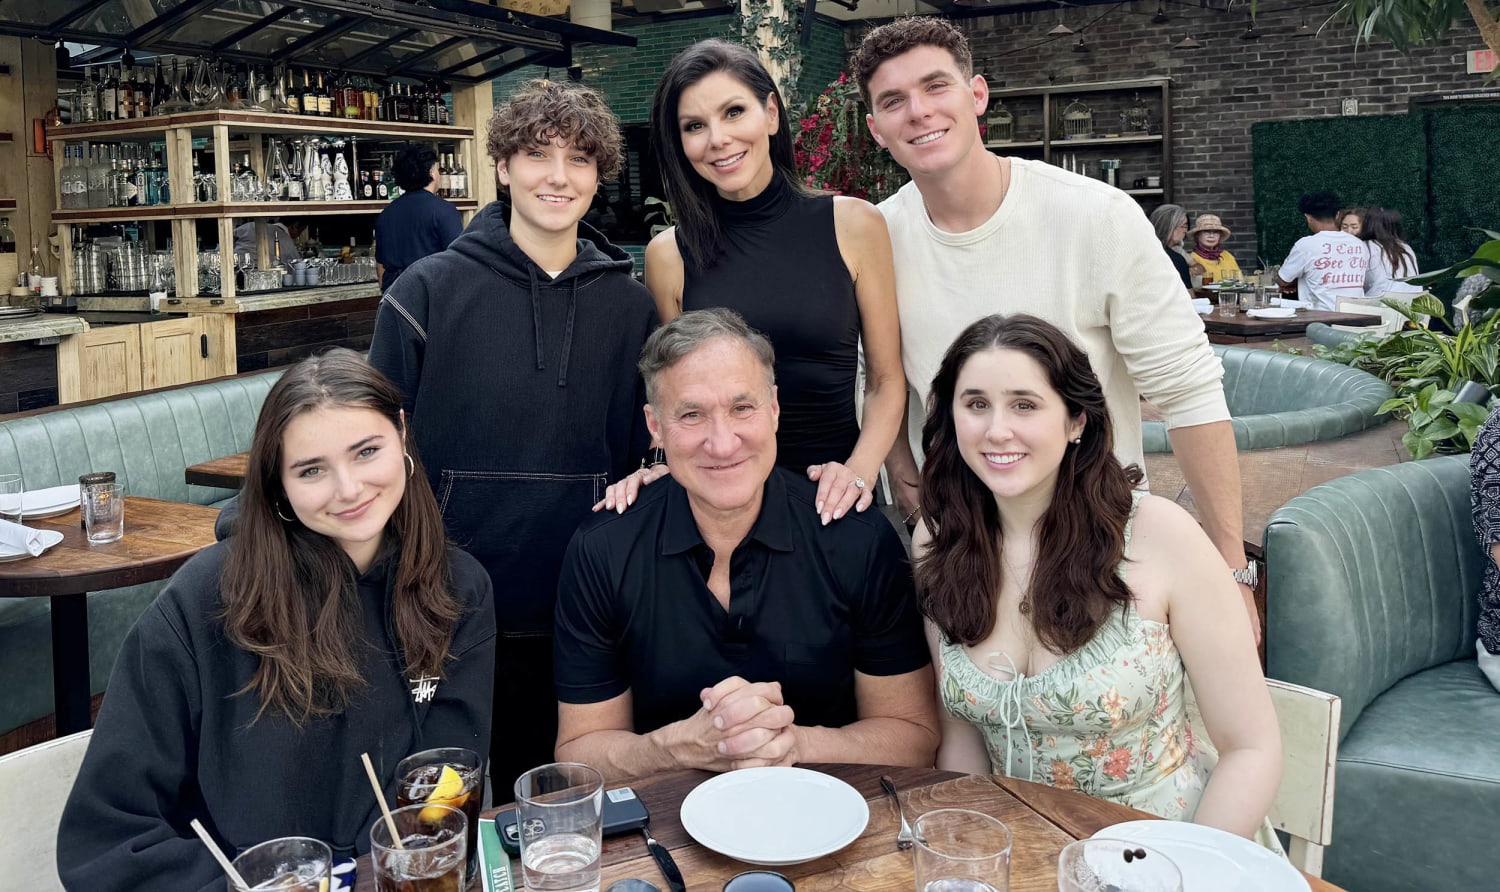 'Real Housewife' Heather Dubrow: What I've learned raising 3 LGBTQ+ kids